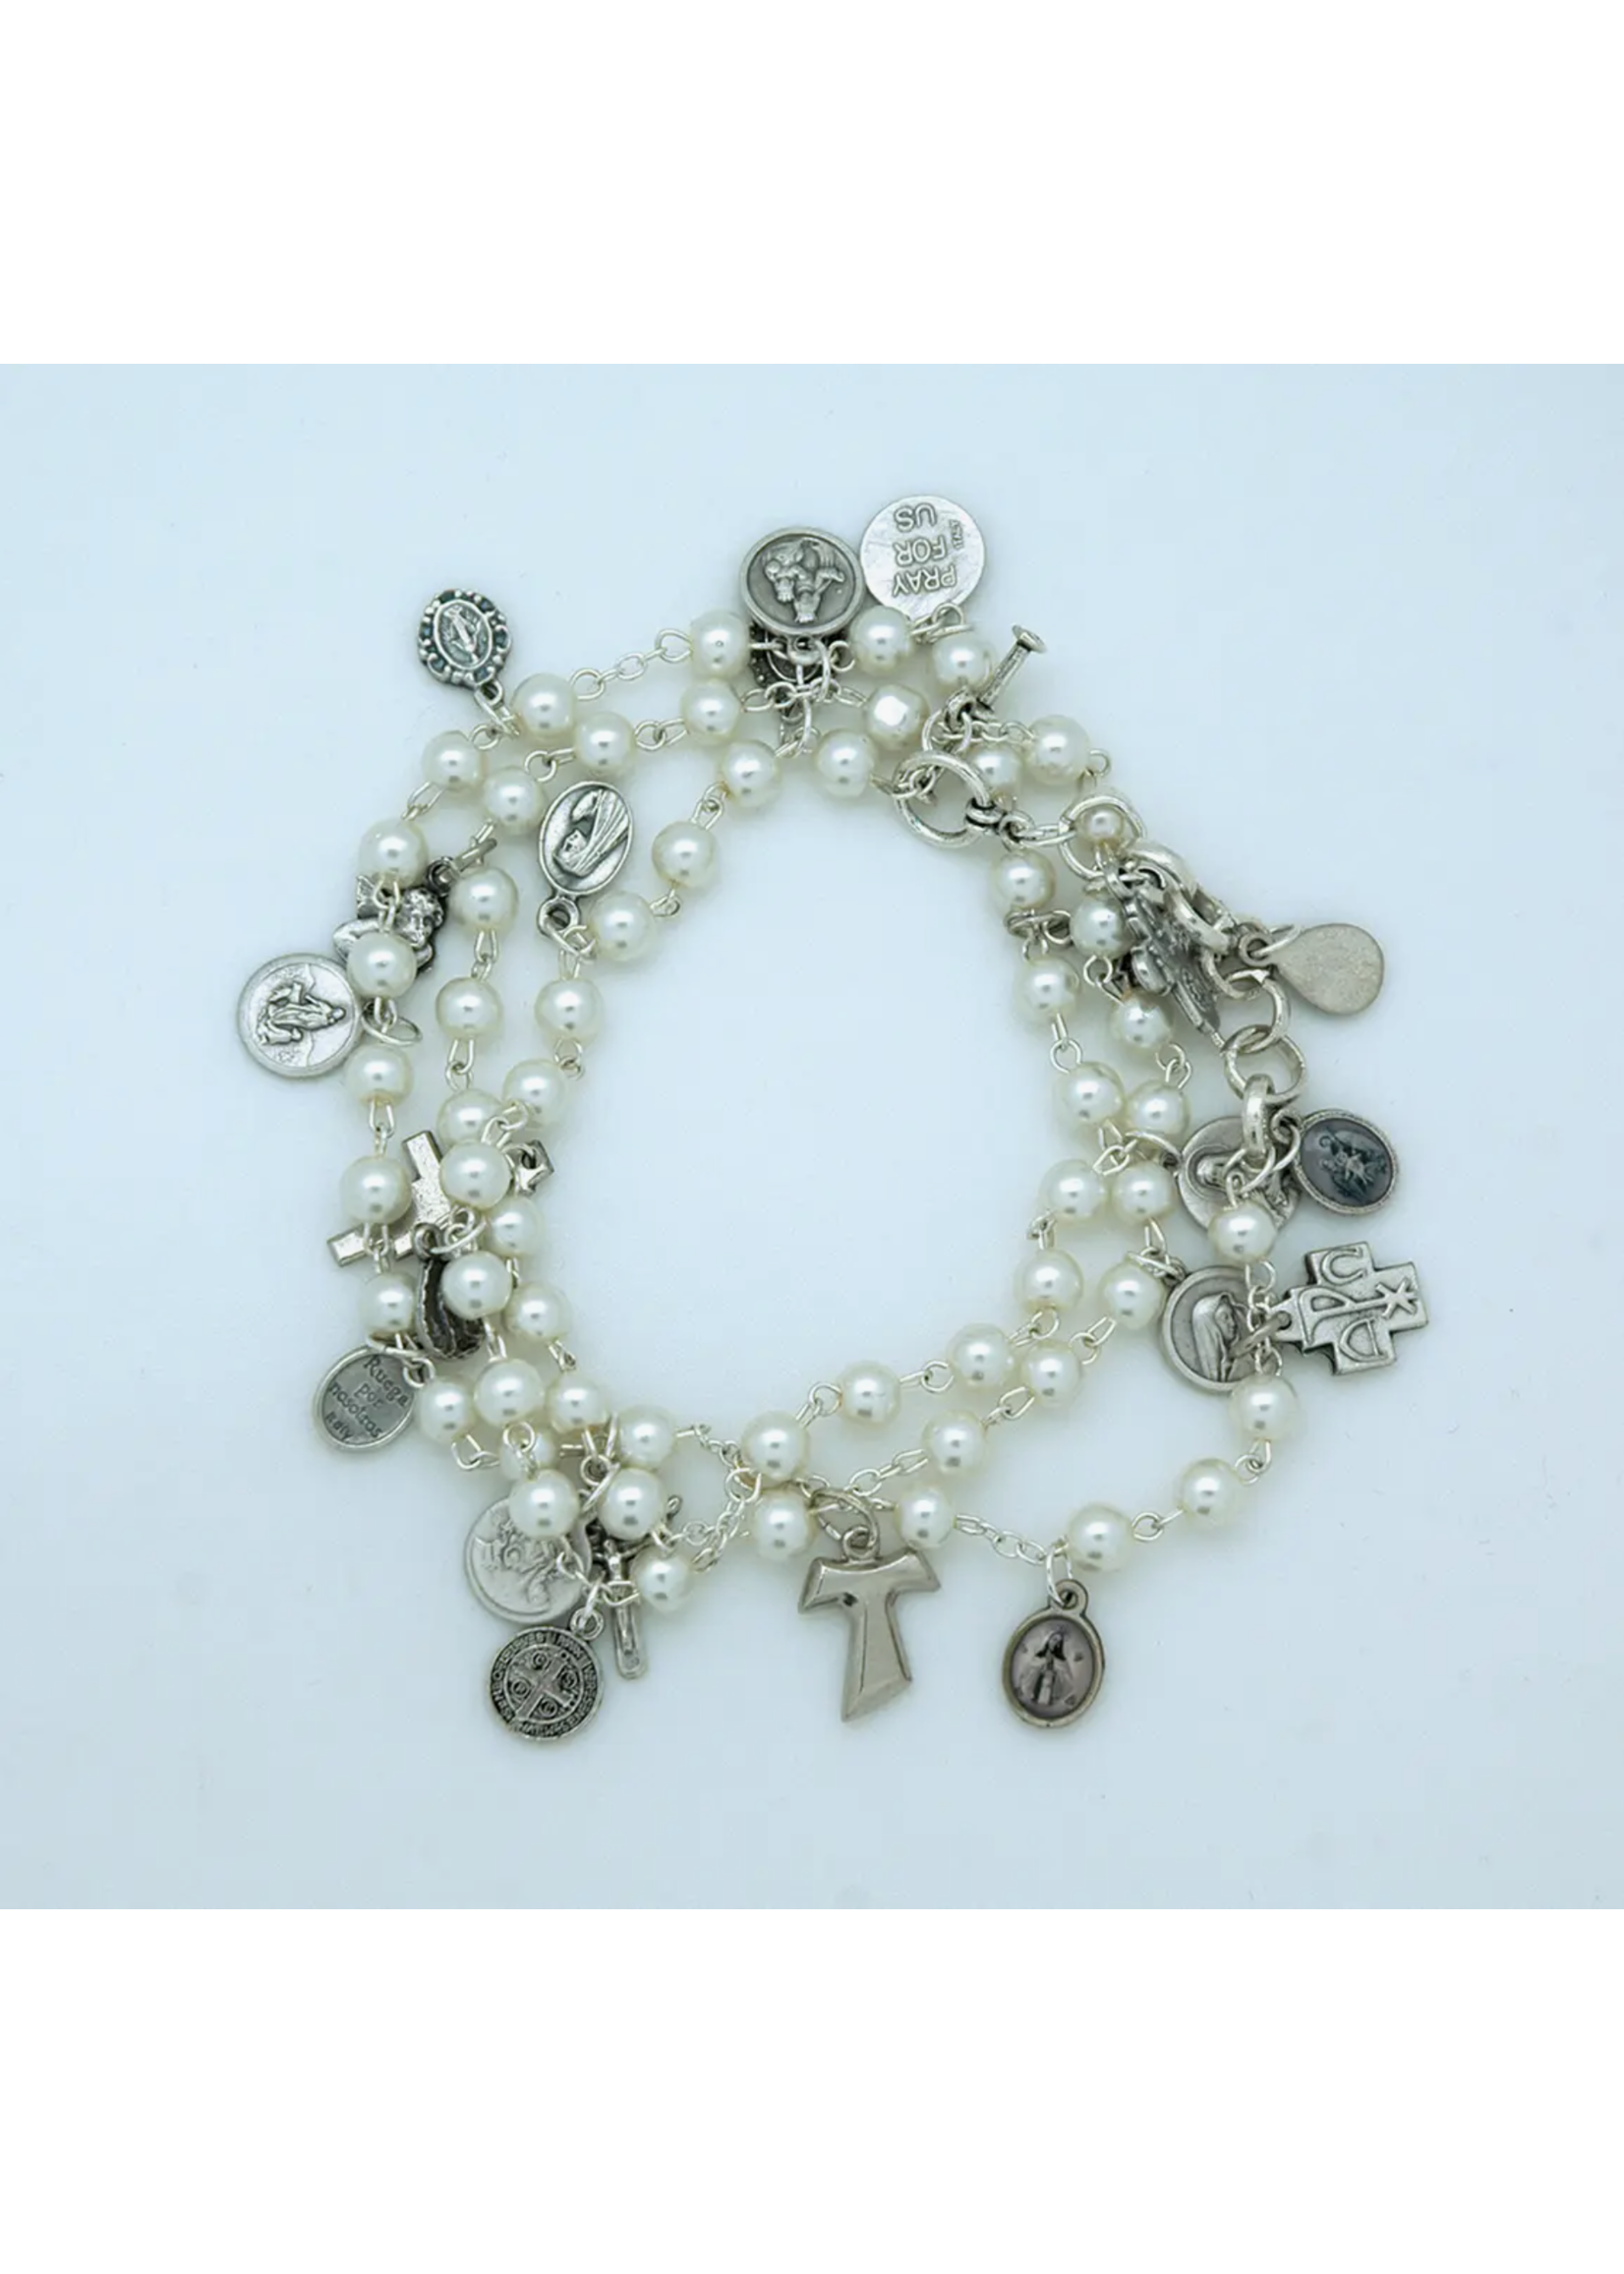 White Glass Pearl Rosary wrap bracelet or necklace with assorted medals